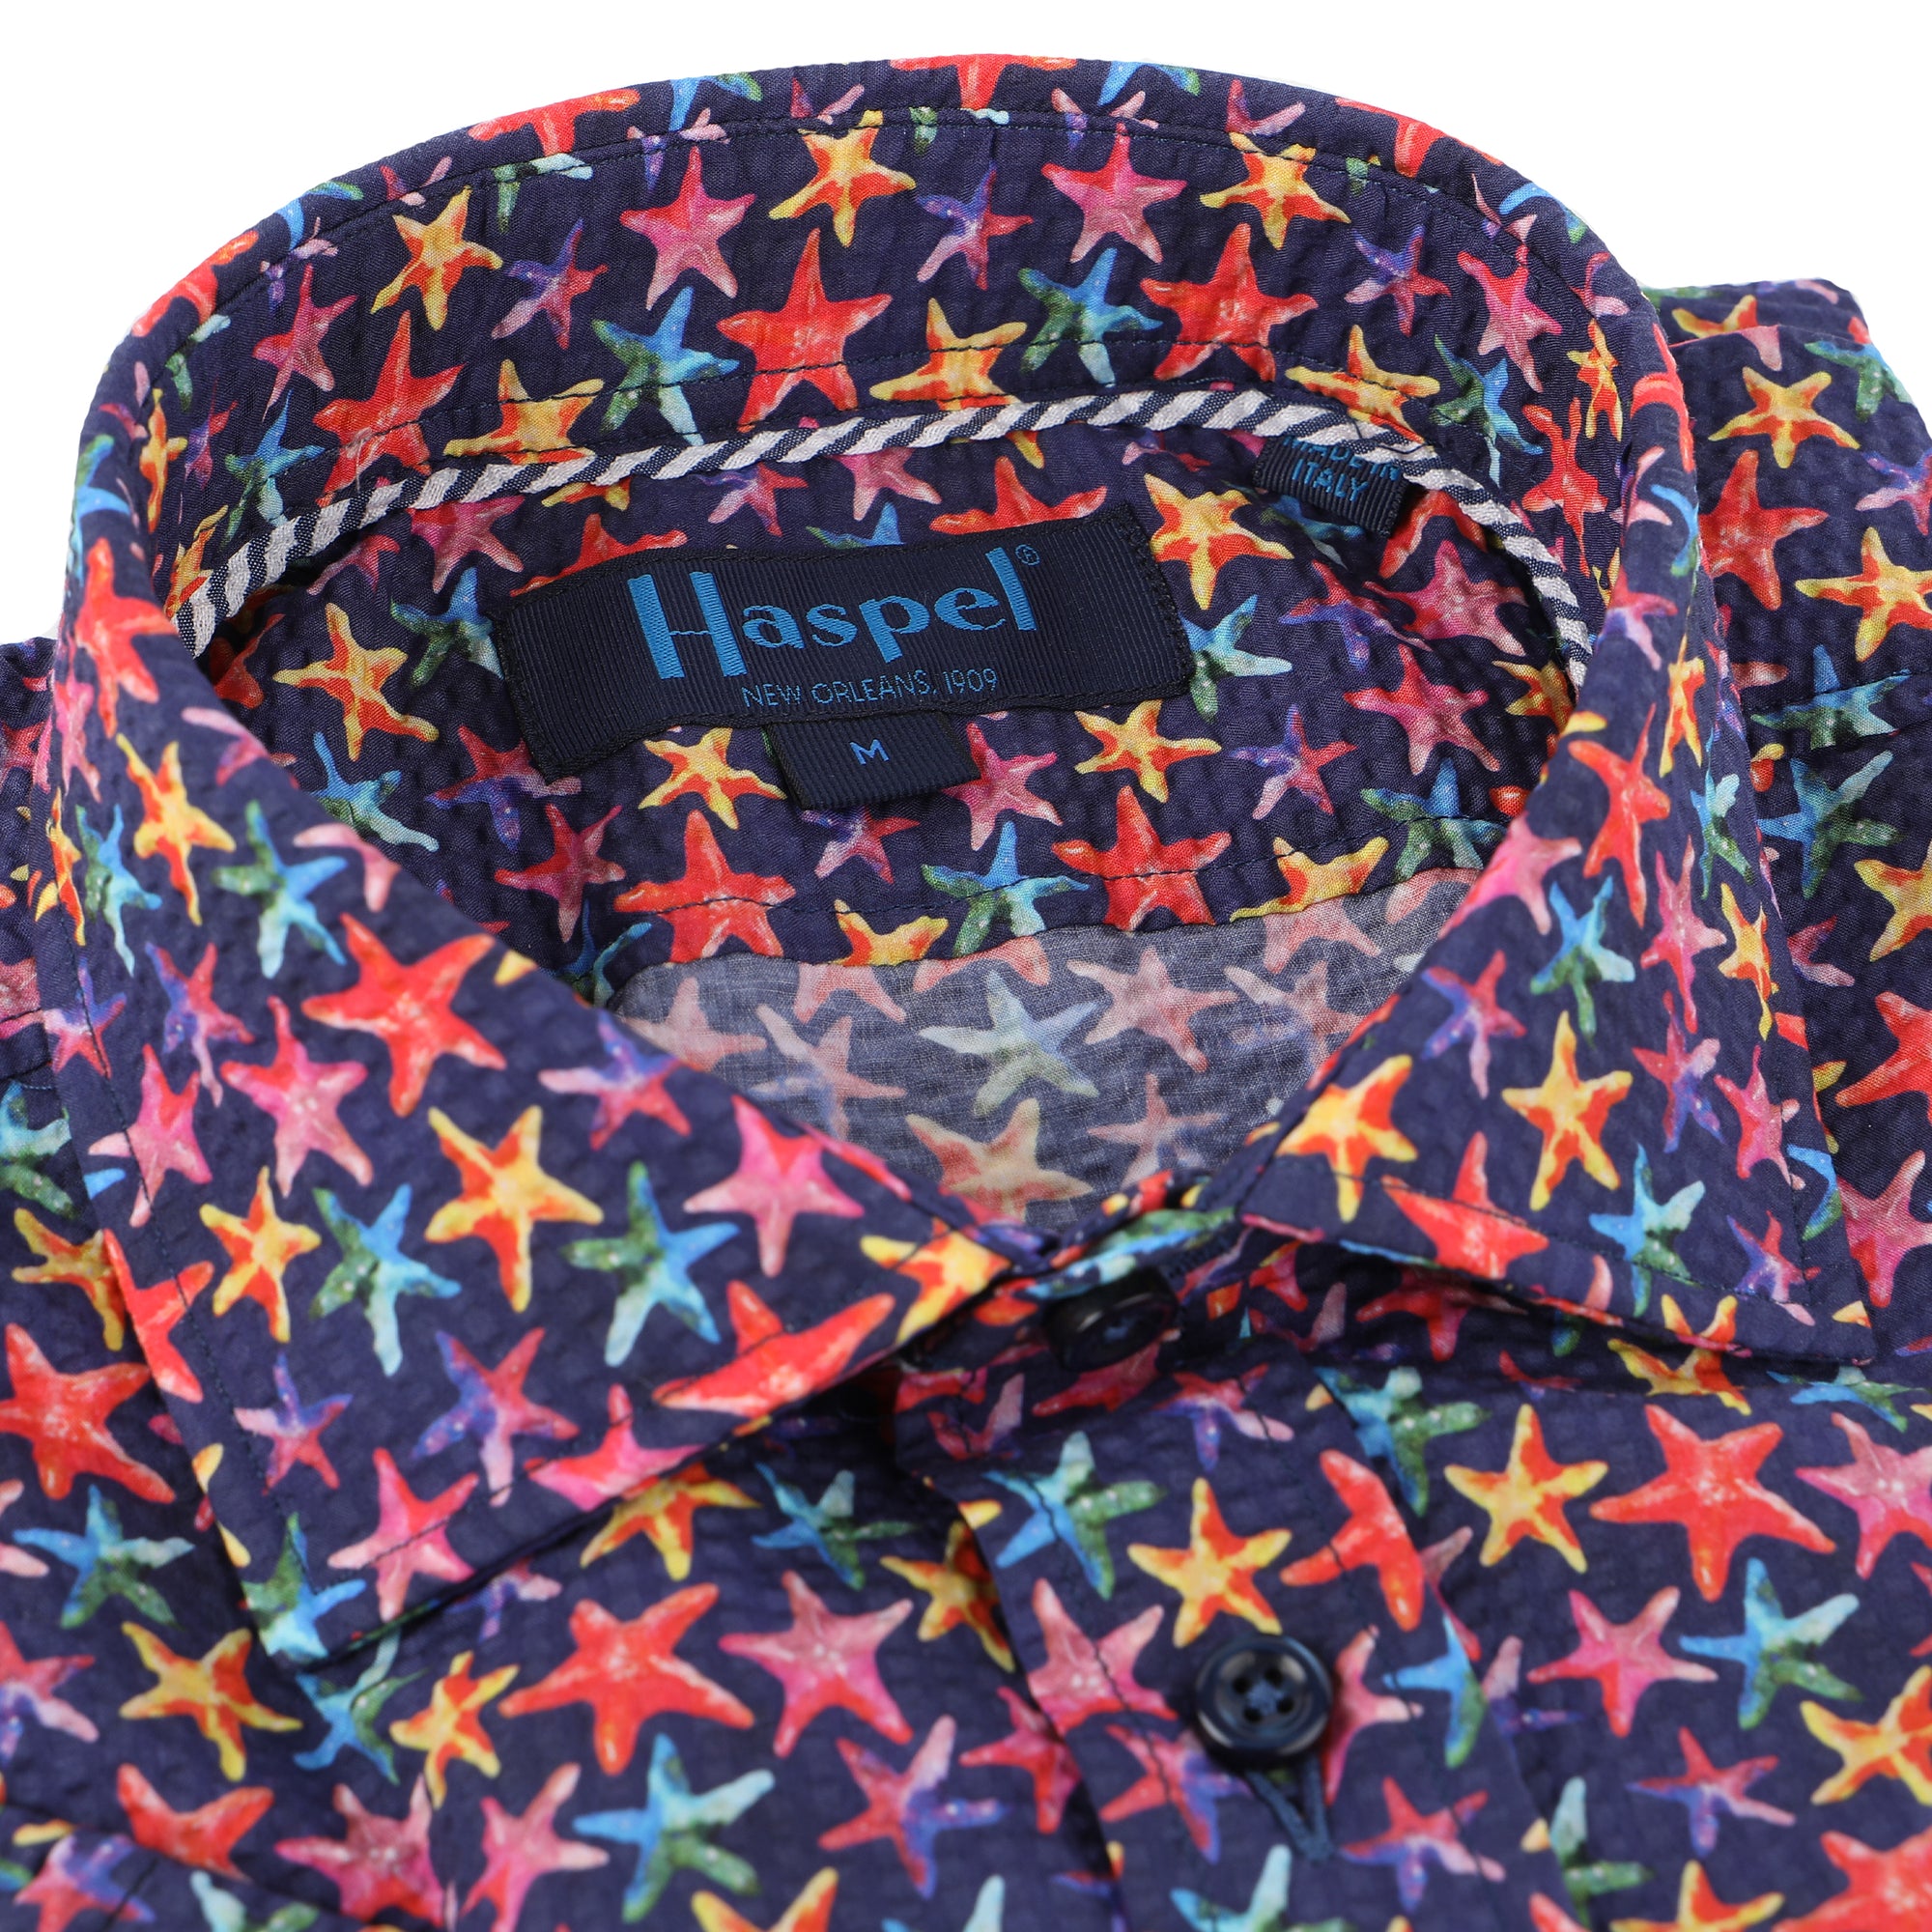 The stars of the sea will make you a star of the seaside. Good times head will have you floating and cool in 100% cotton.